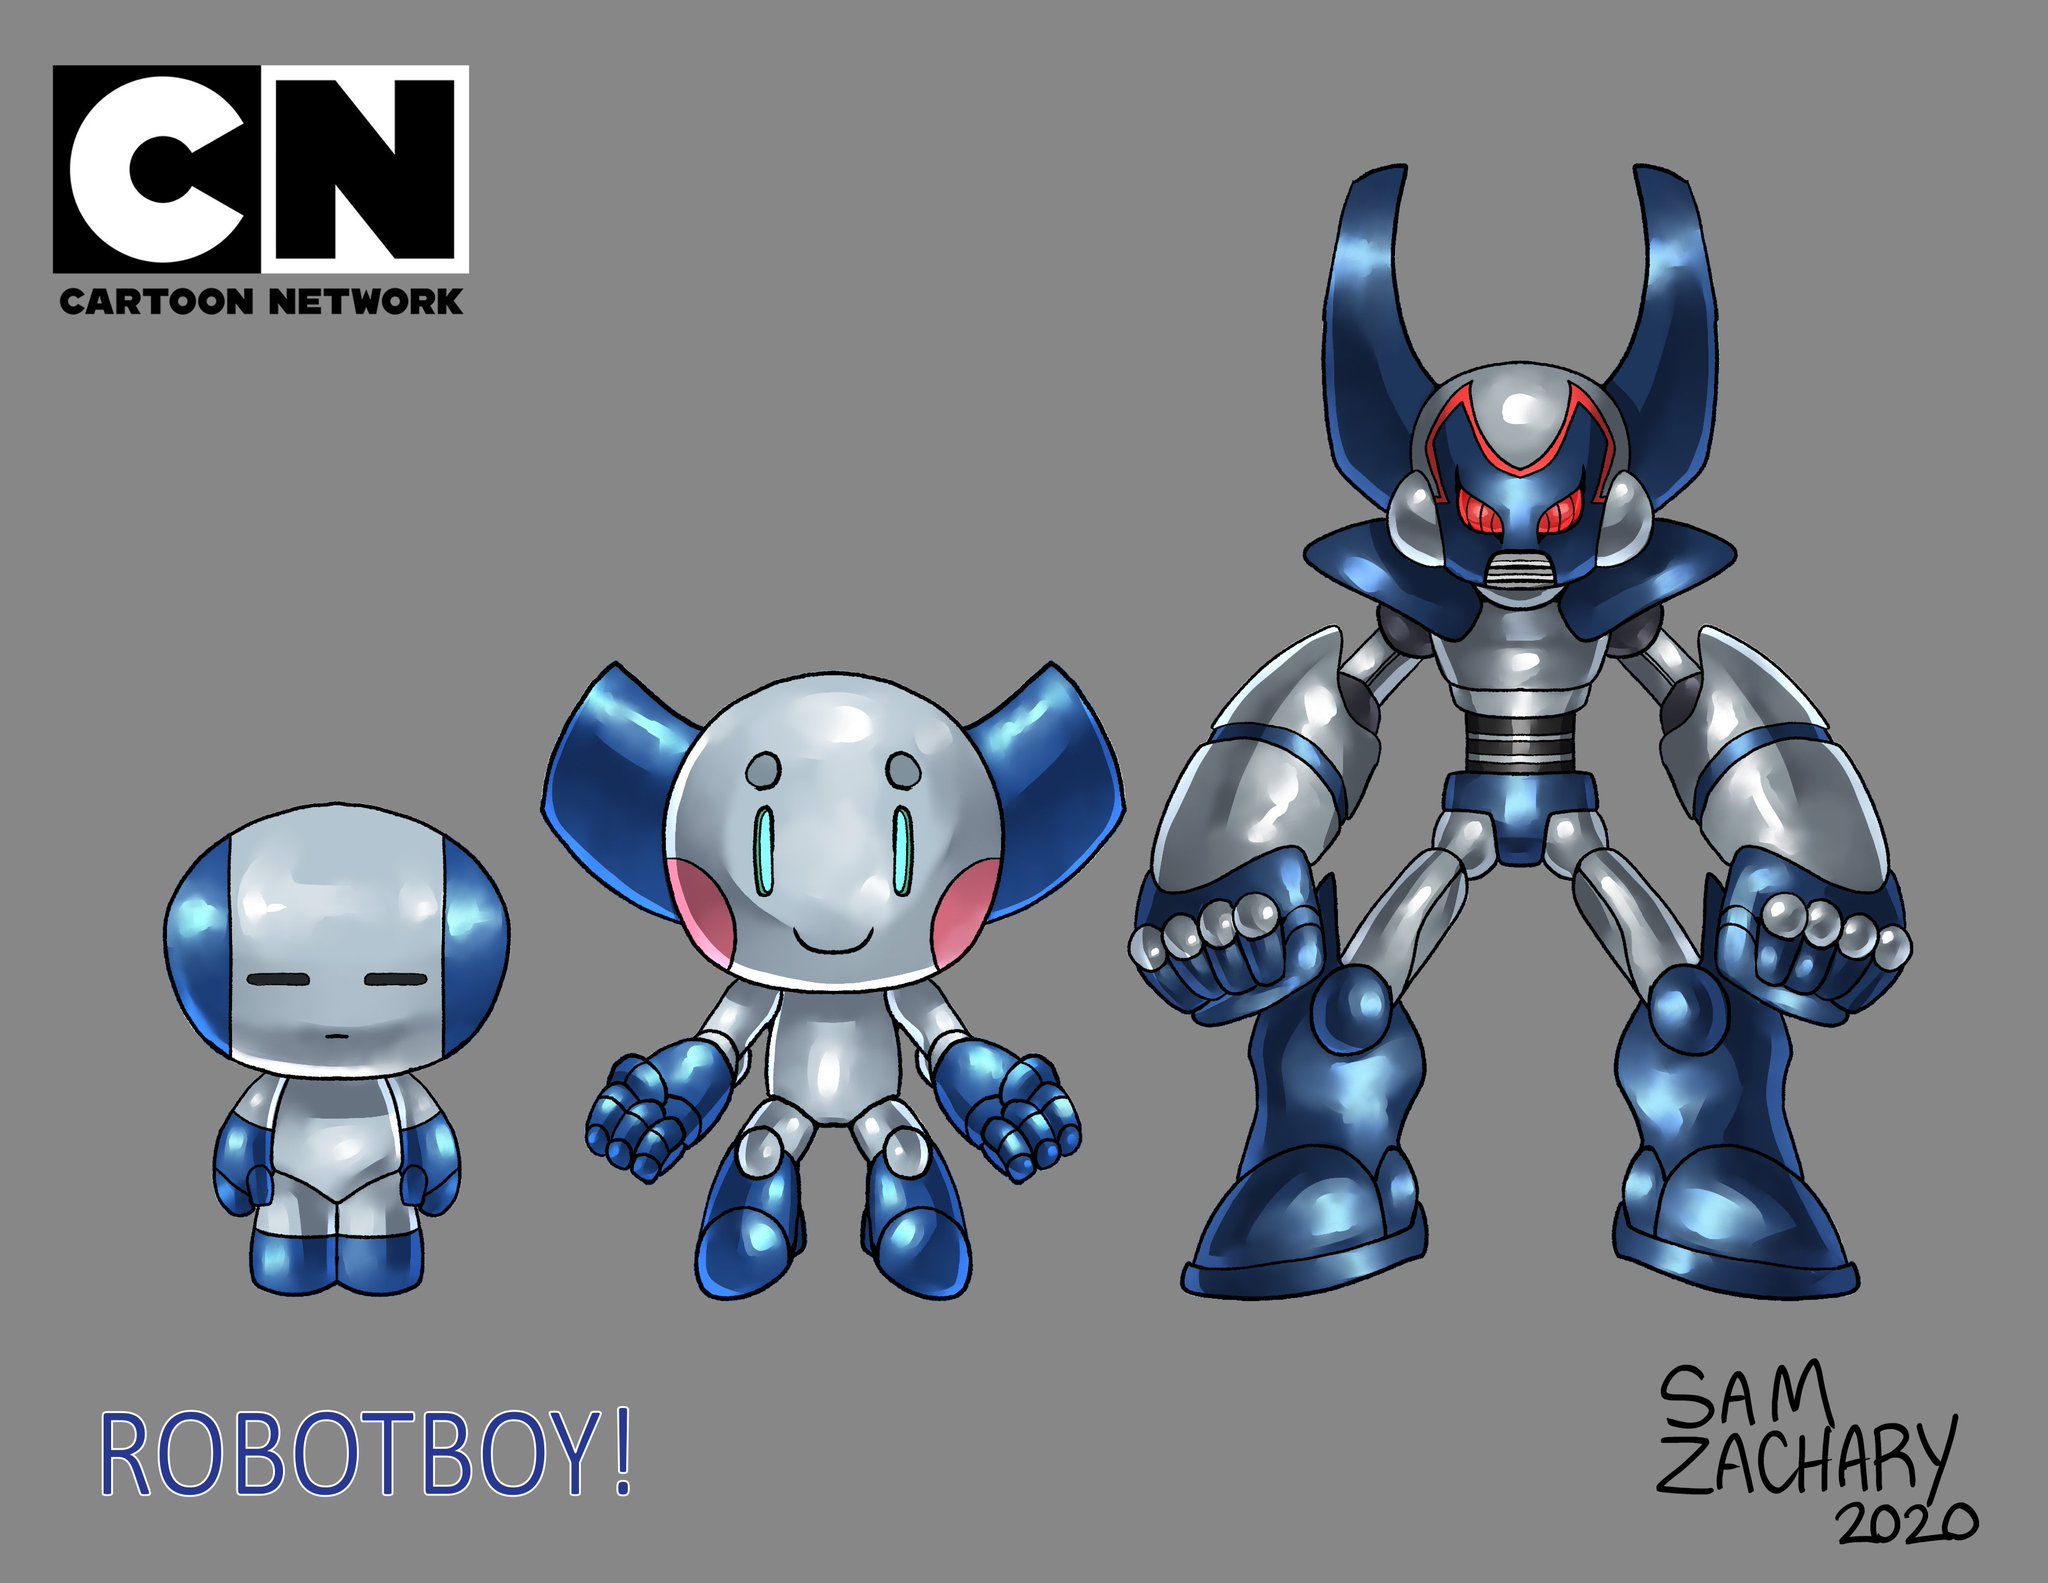 Samyueru Zackari on X: Yo, another couple of Robotboy Character Designs! I  have one other character design, but I'm saving it for last cause it's  pretty damn special and hot! Stay tuned